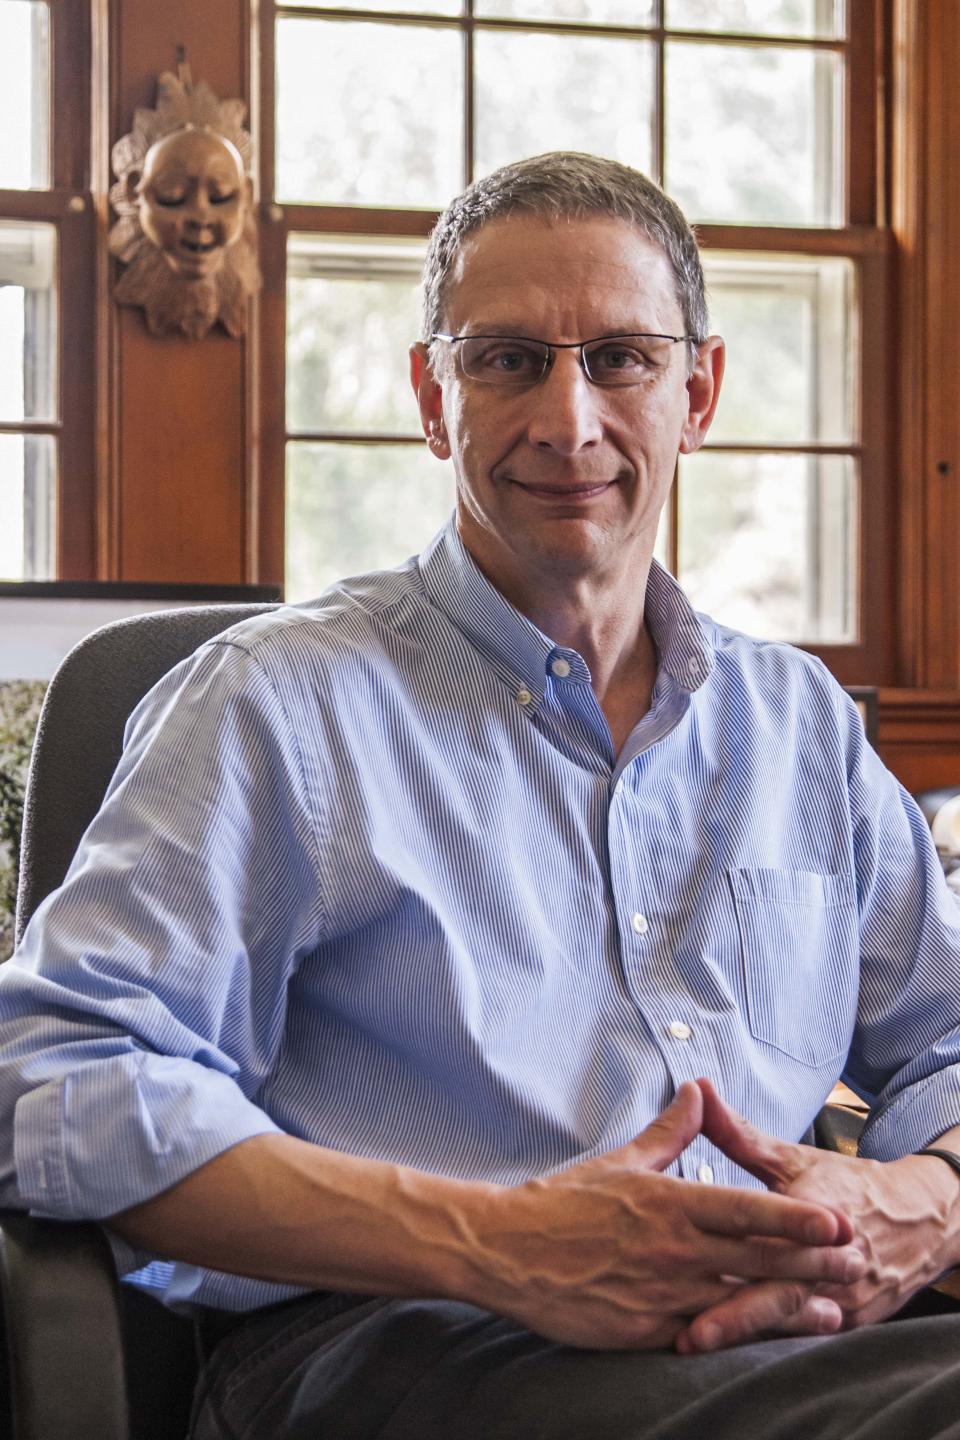 In this Sept. 19, 2012 photo provided by the Chicago-based John D. and Catherine T. MacArthur Foundation, David Finkel, 56, a Washington Post journalist whose long-form news writing has transformed readers’ understanding of military service and sacrifice, is seen at his home in Silver Spring, Md. Finkel is among 23 recipients of this year's MacArthur Foundation "genius grants." (AP Photo/Courtesy of the John D. and Catherine T. MacArthur Foundation, John Spaulding)